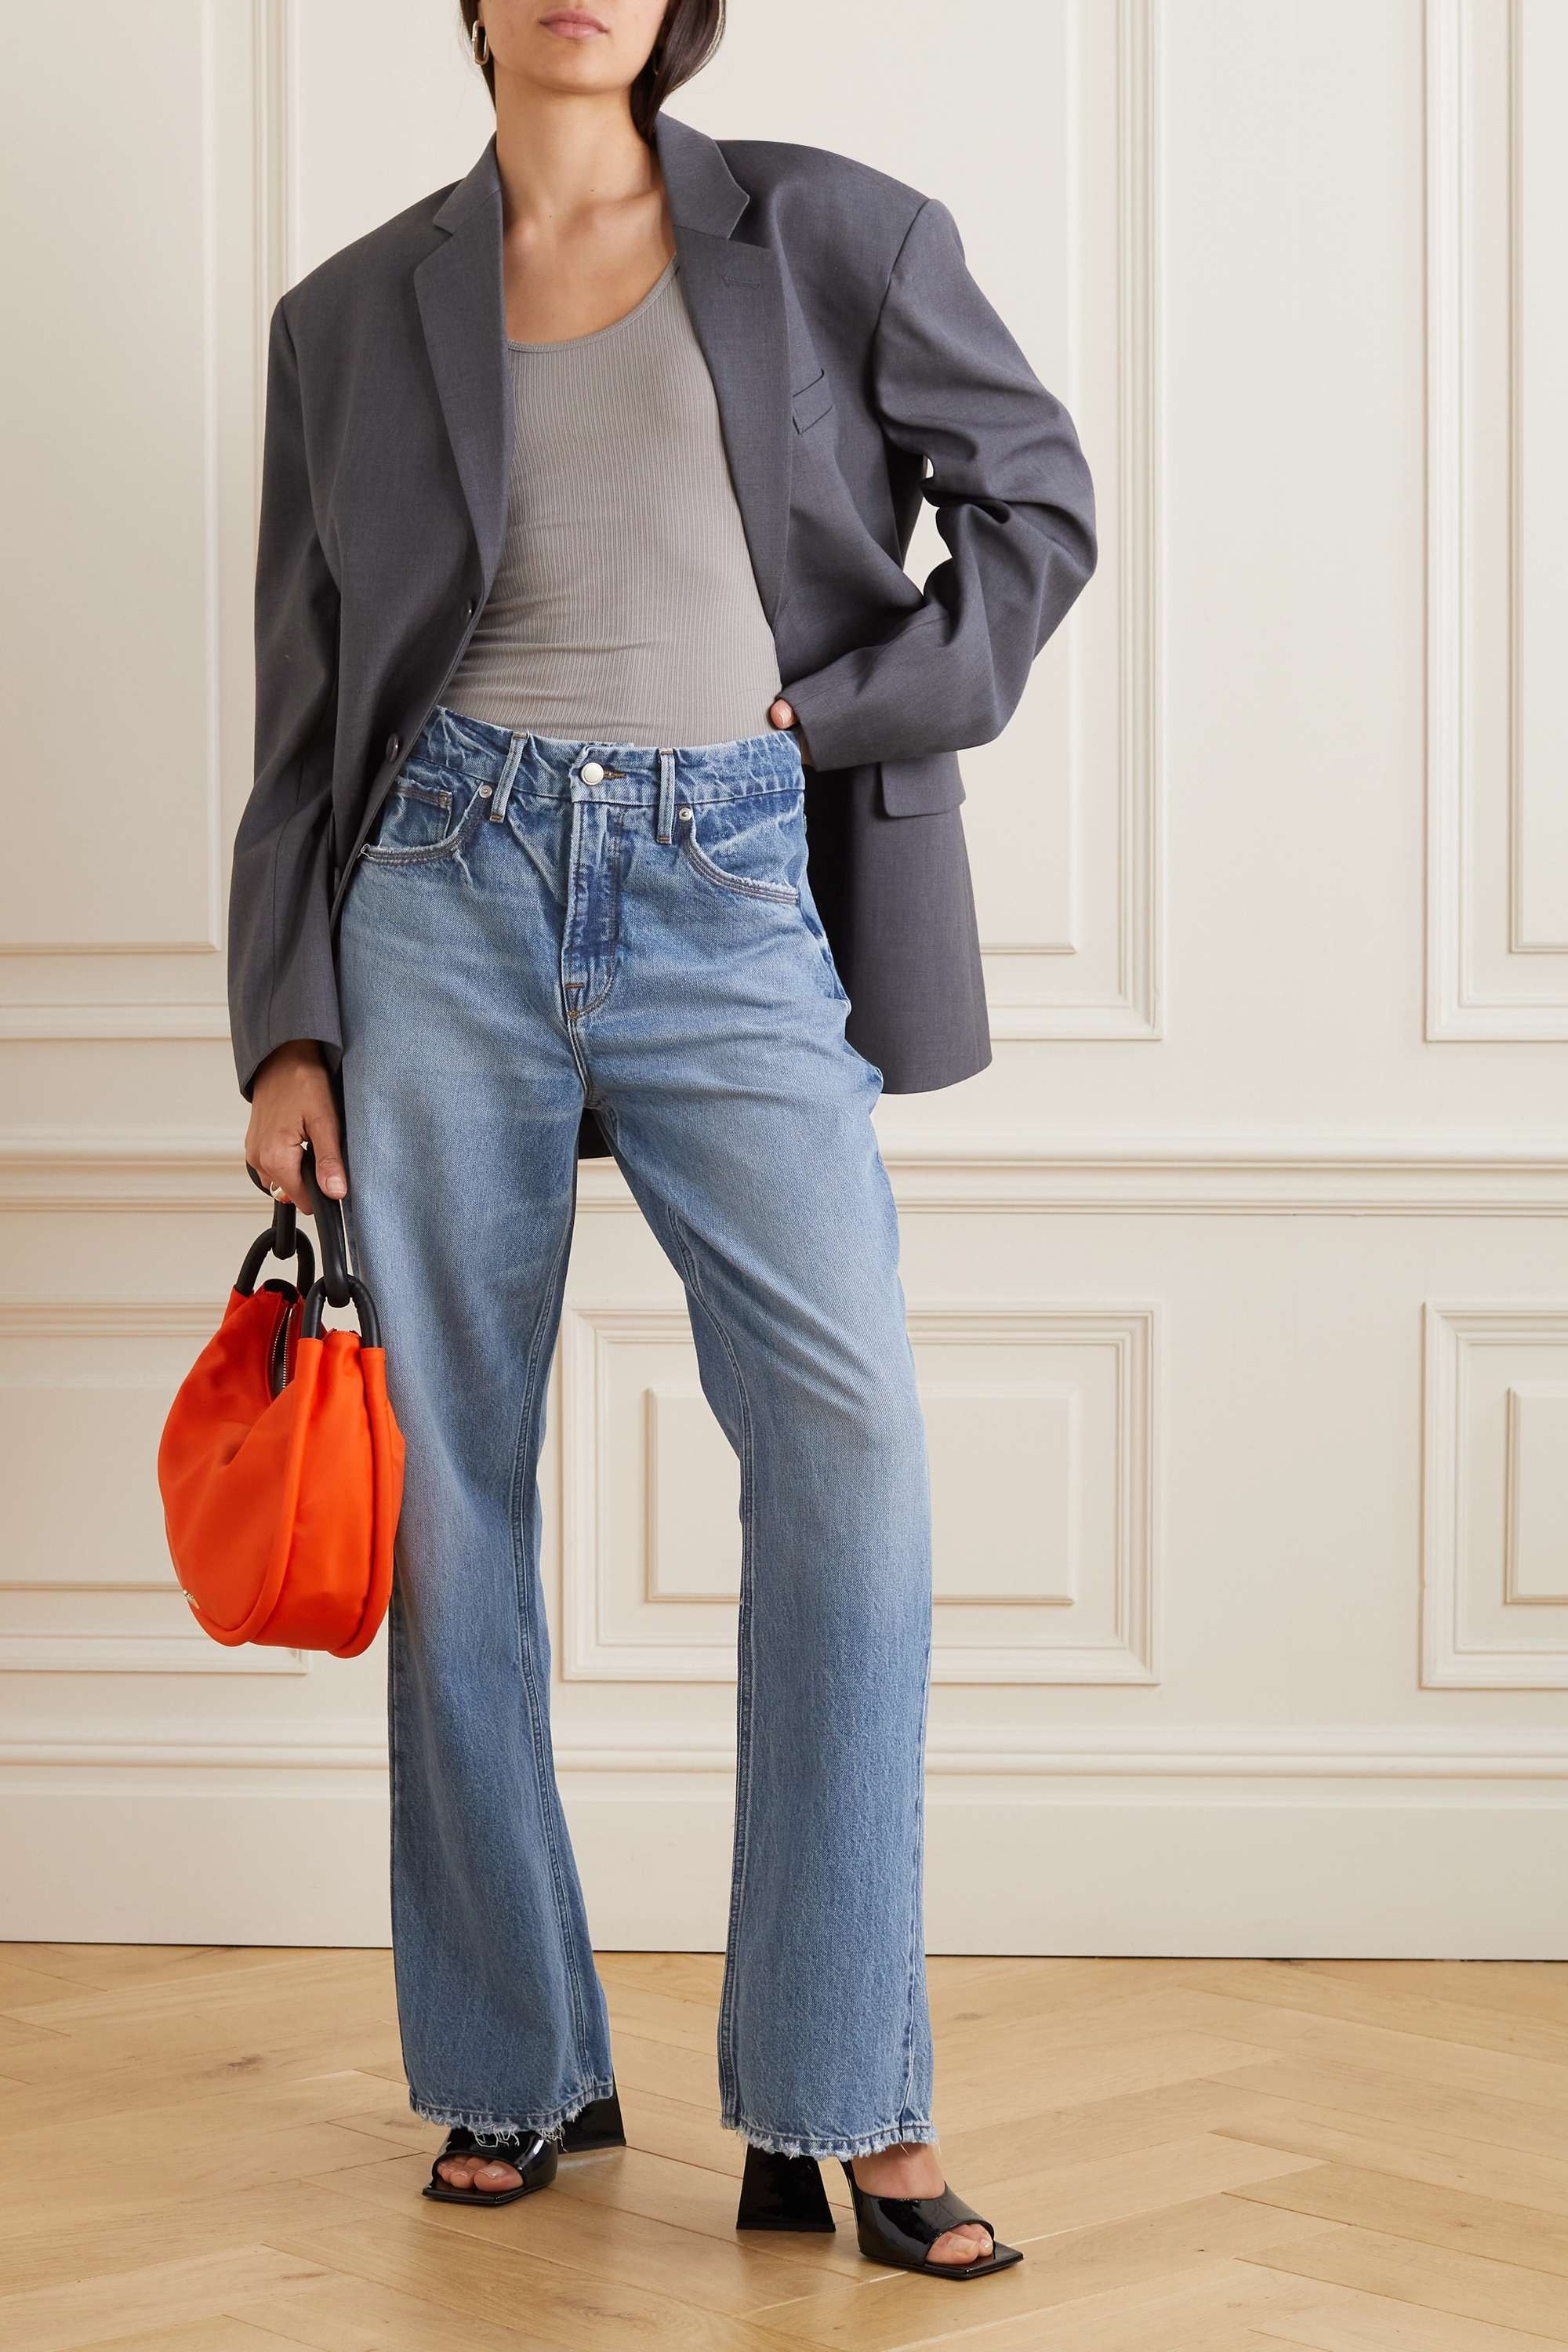 The Best Loose-Fitting Jeans for Women | Who What Wear